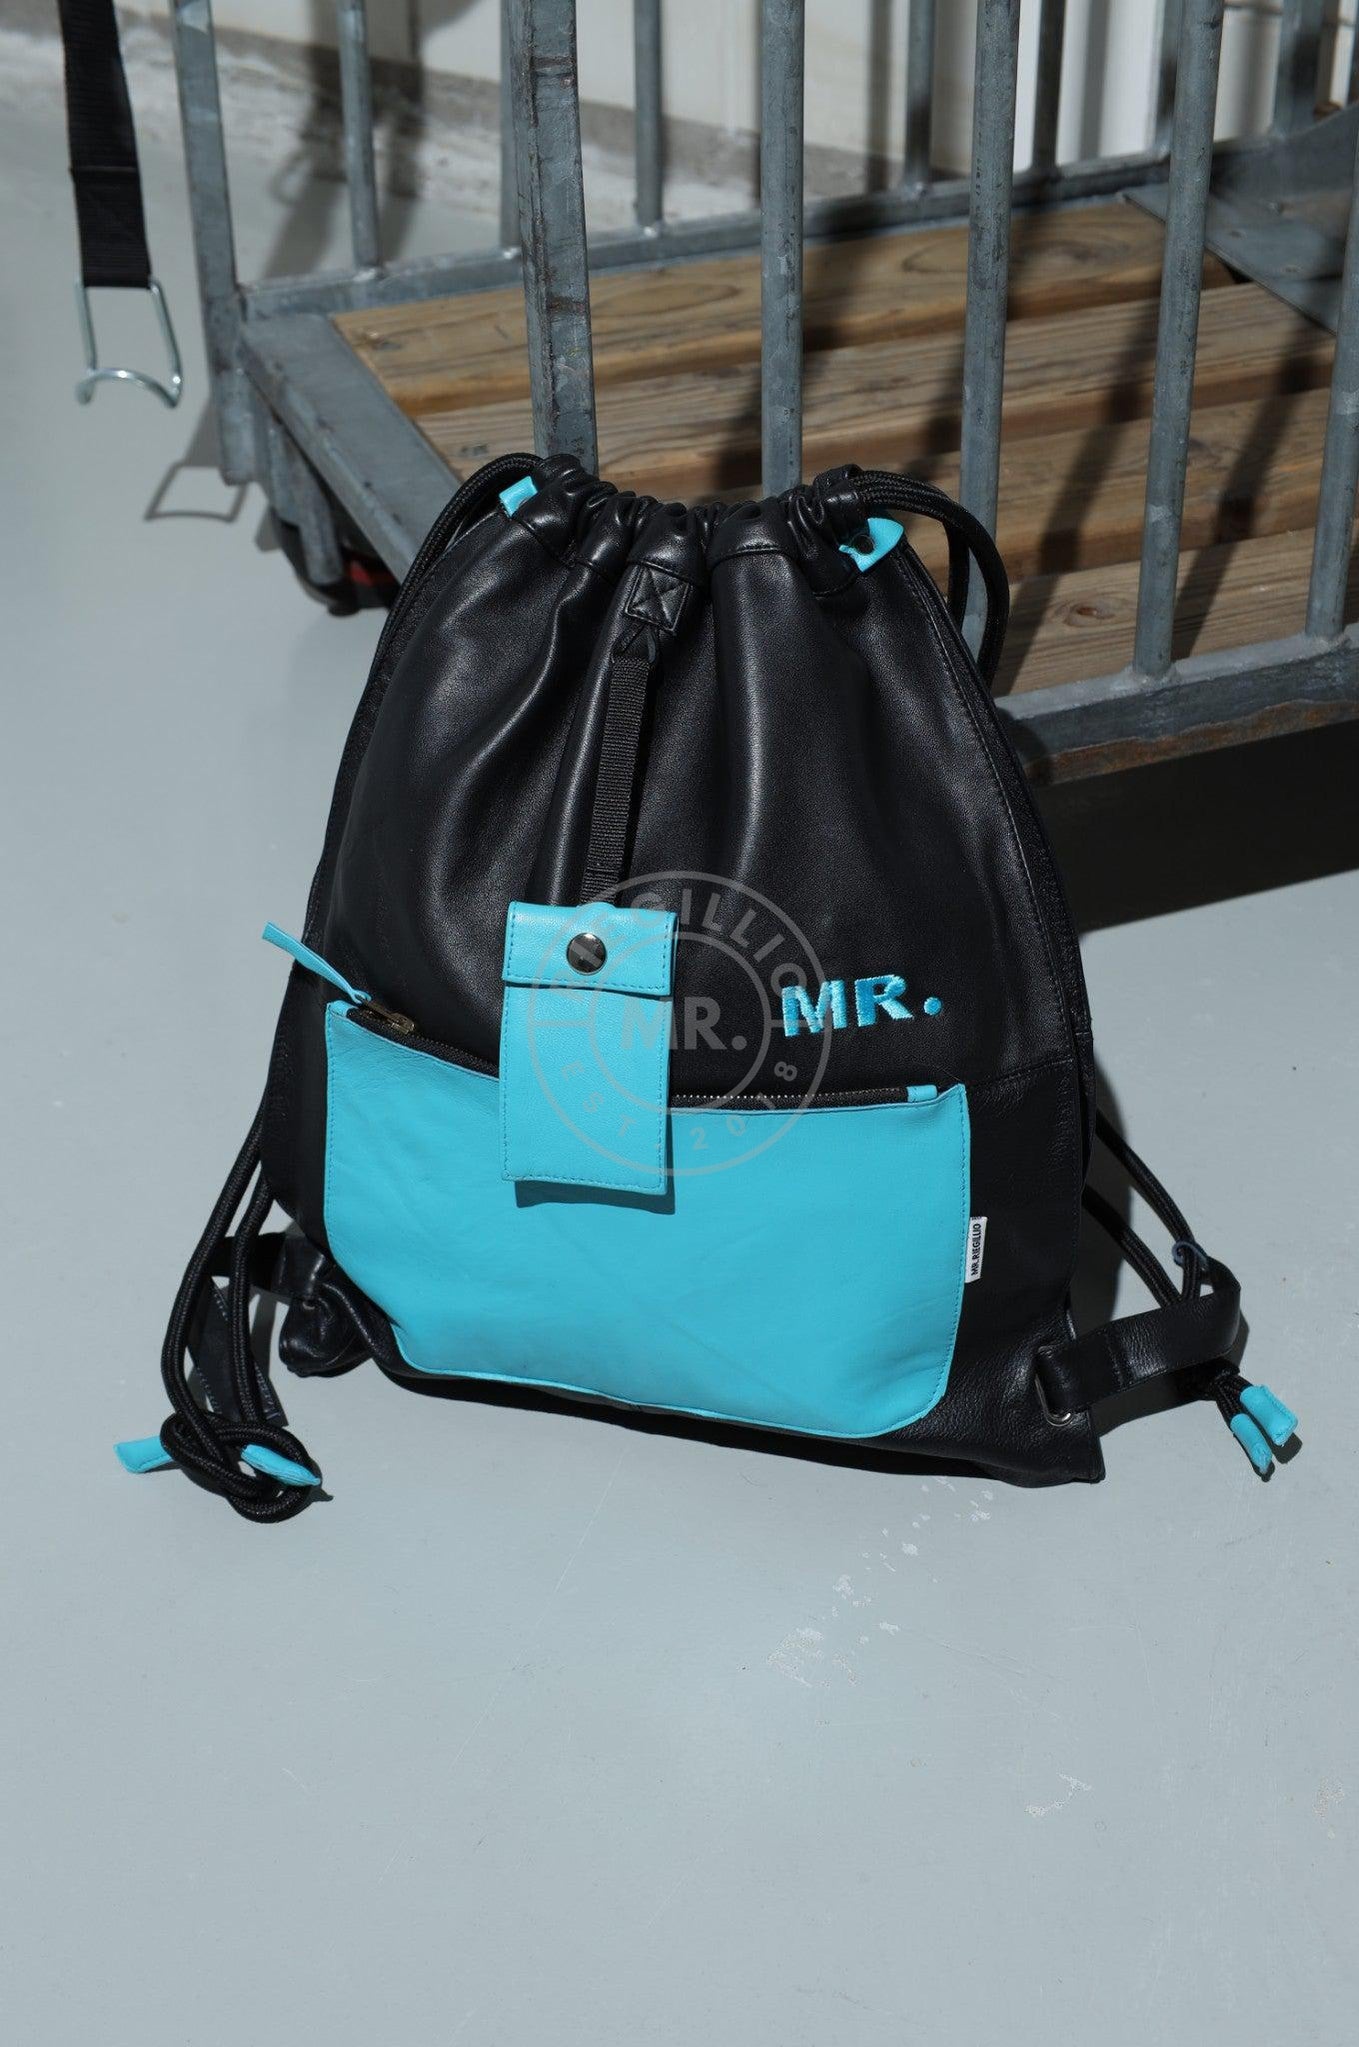 Leather Backpack Black - Light Blue Touch-at MR. Riegillio